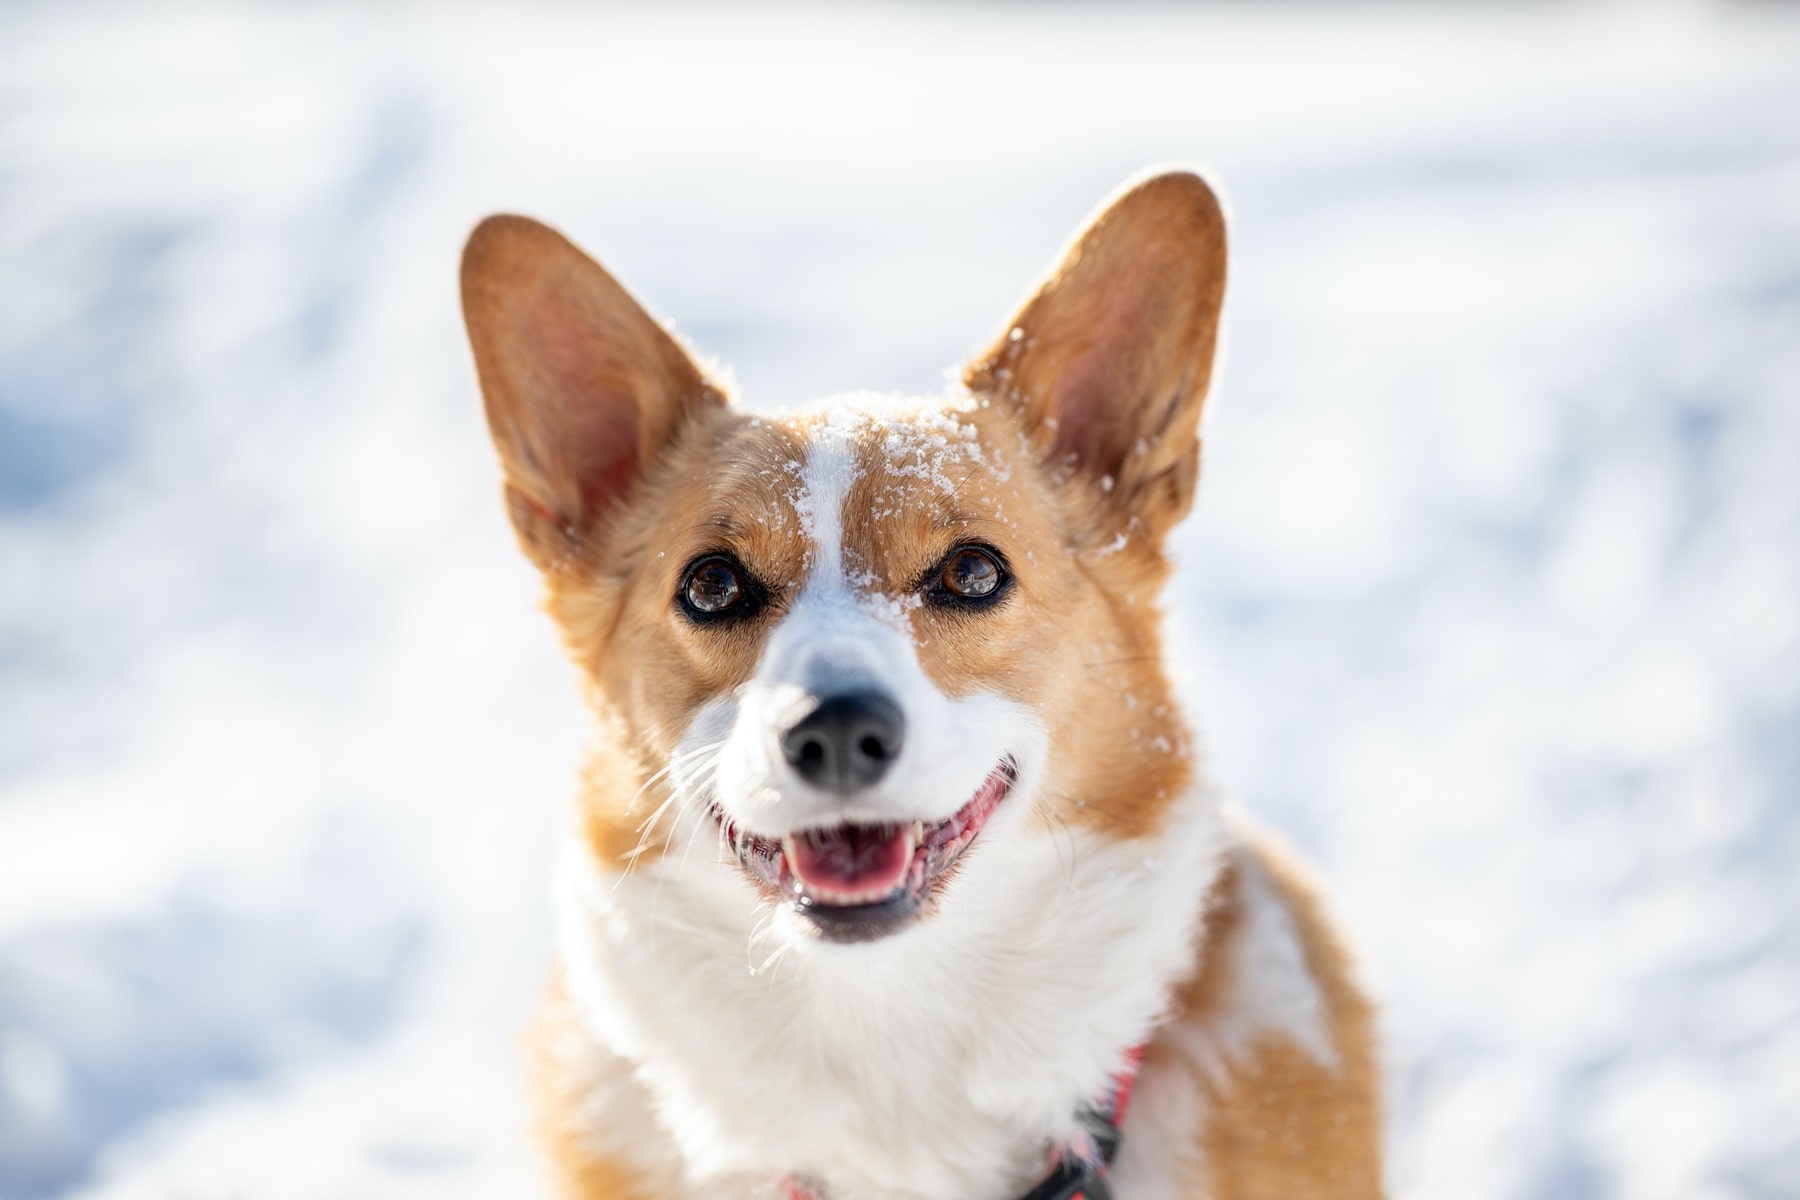 This happy corgi is smiling in the snow.